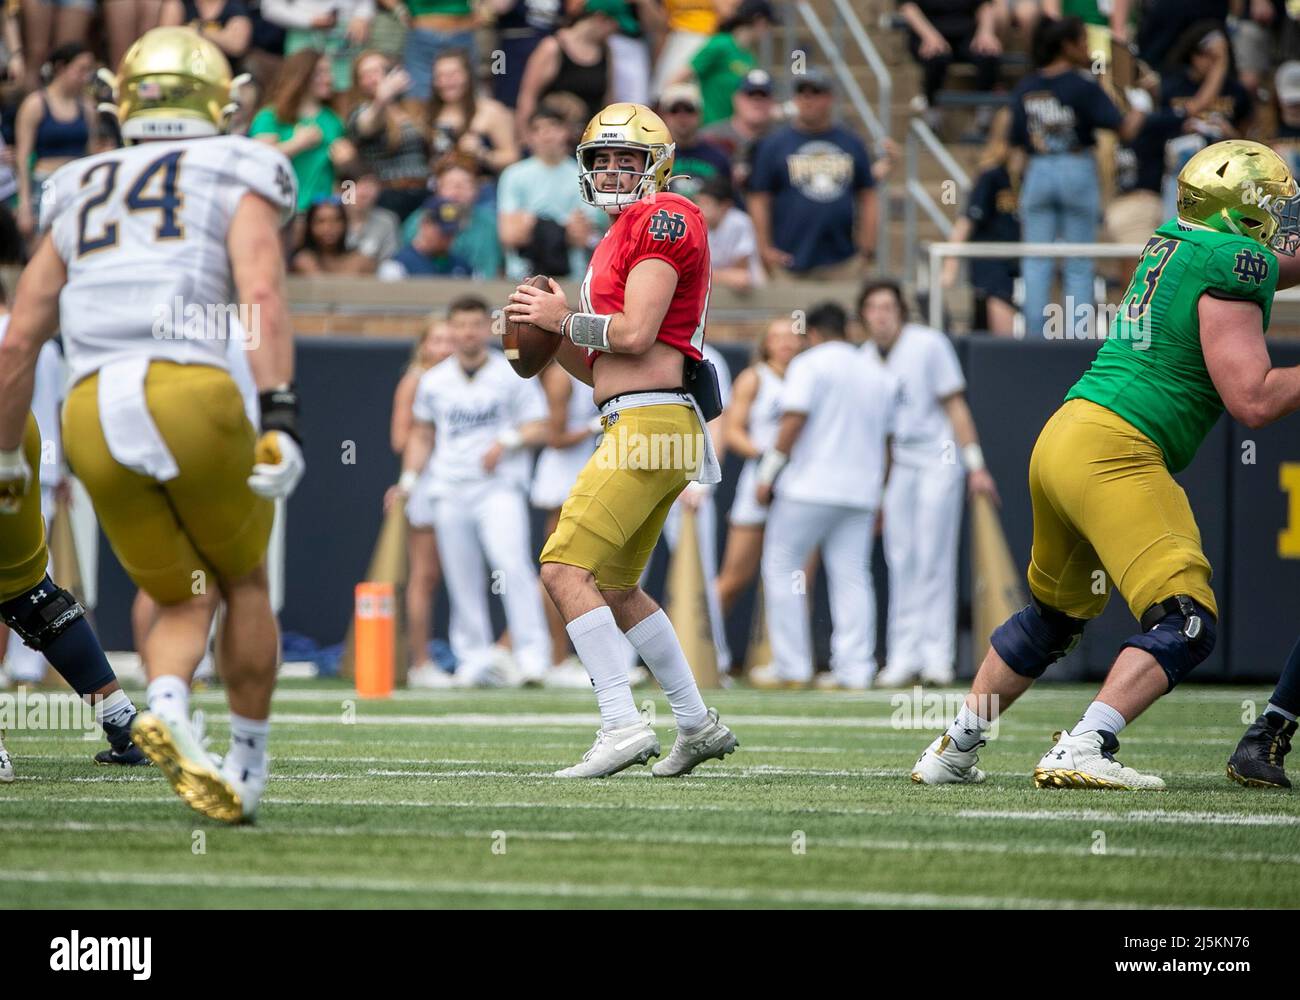 April 23, 2022: Notre Dame quarterback Drew Pyne (10) during the Notre Dame Annual Blue-Gold Spring football game at Notre Dame Stadium in South Bend, Indiana. Gold defeated Blue 13-10. John Mersits/CSM. Stock Photo